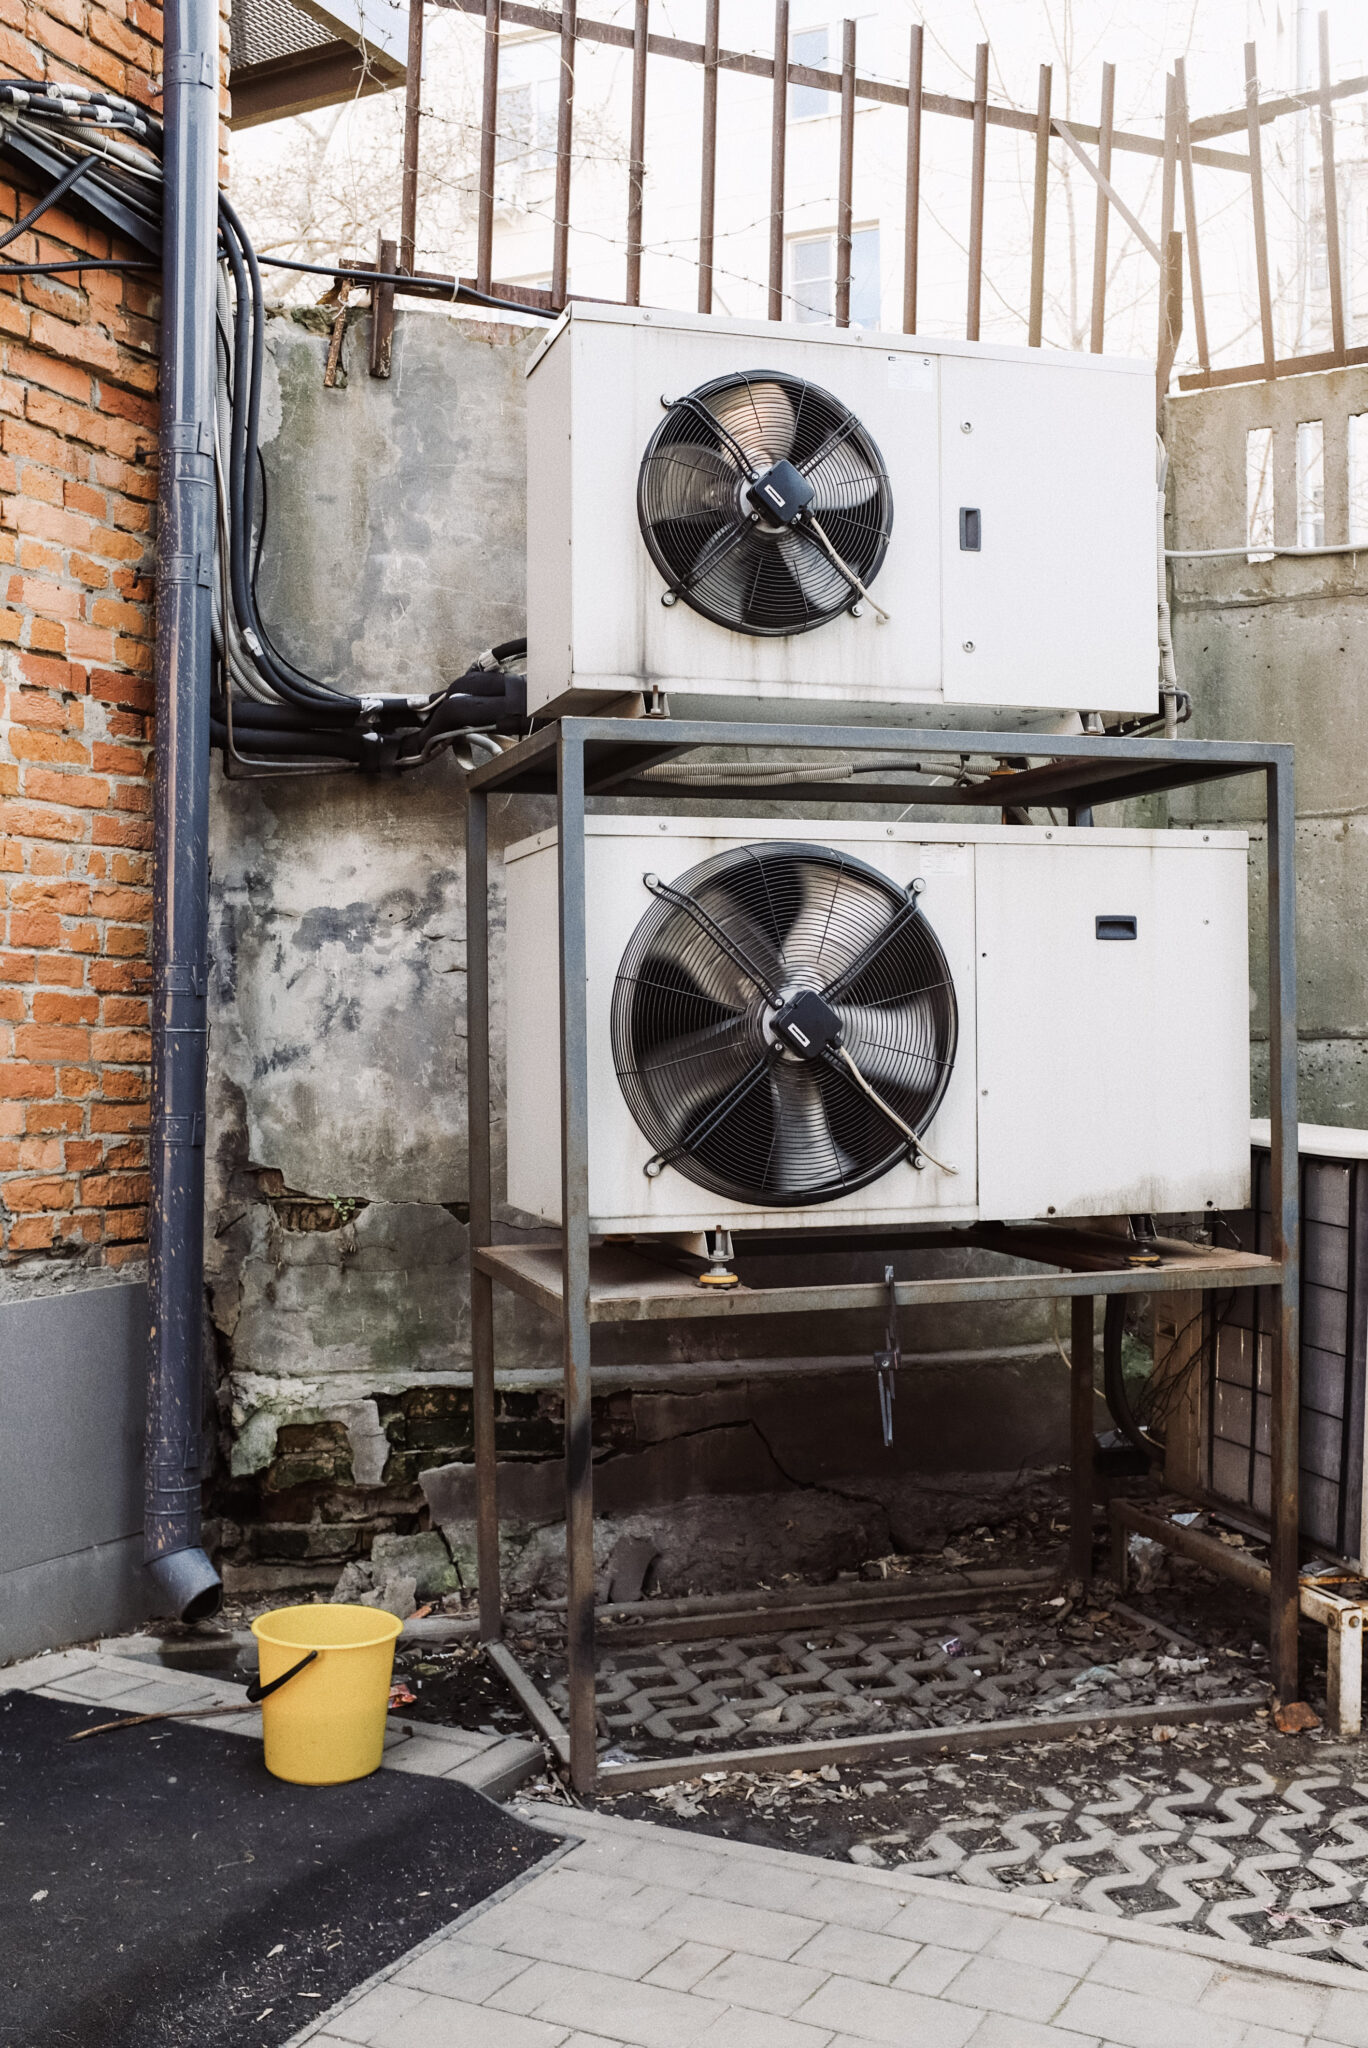 Older AC units outside of an old building. This article covers Lansing MI HVACR and AC Repair near you.